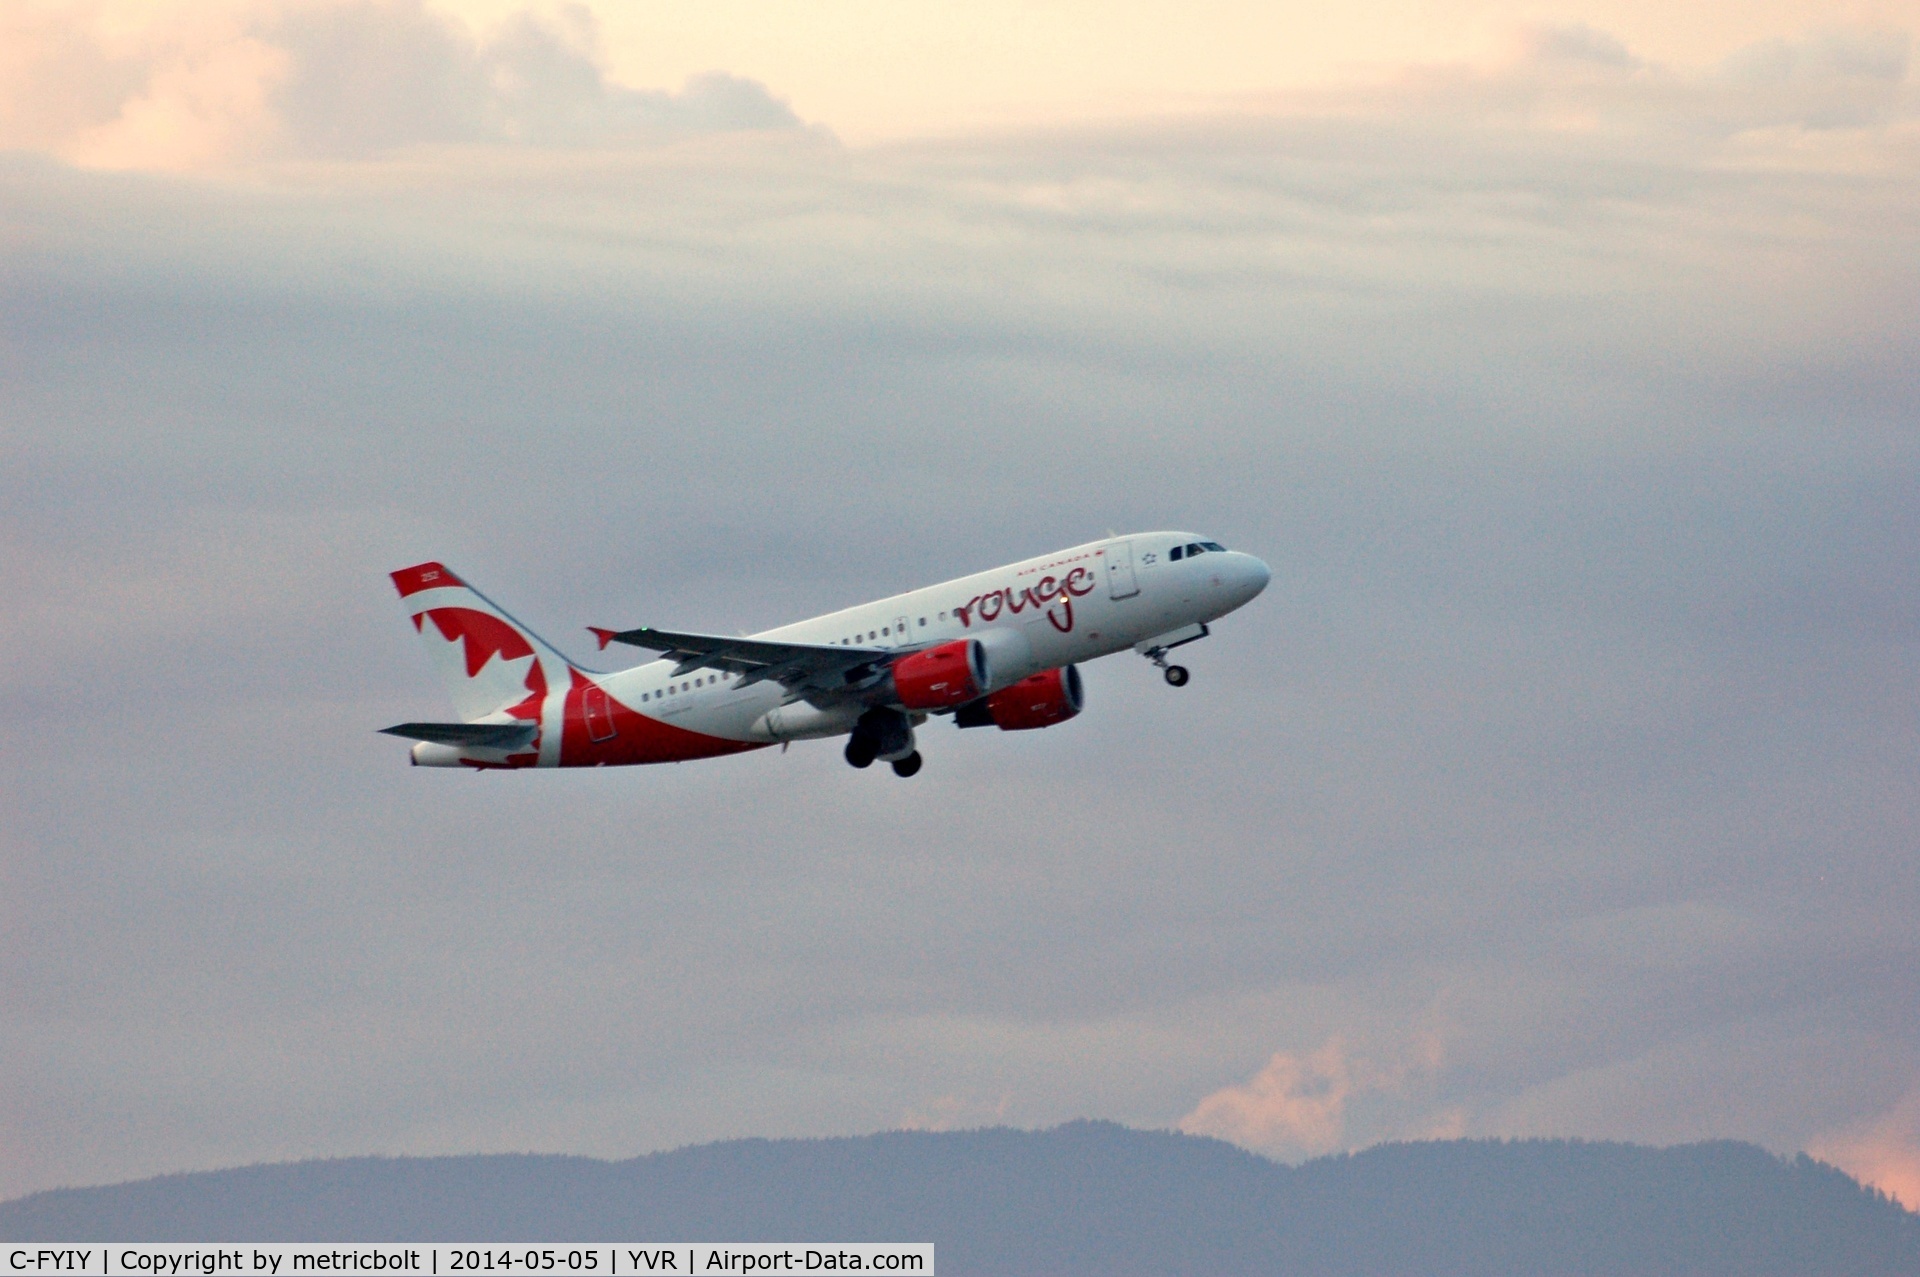 C-FYIY, 1996 Airbus A319-114 C/N 634, Now in AC Rouge livery